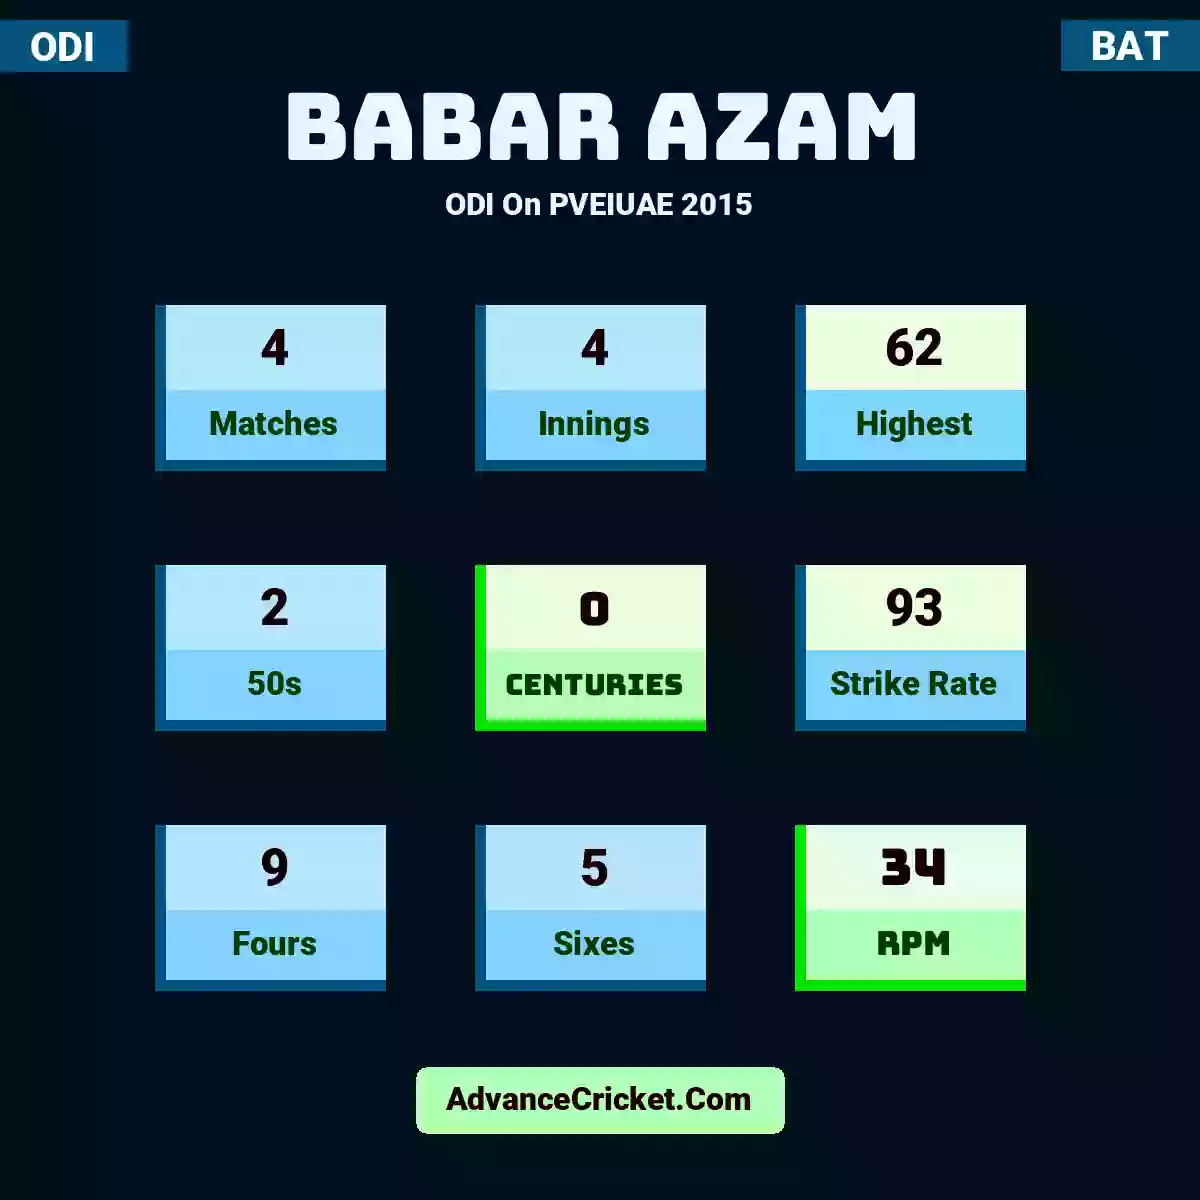 Babar Azam ODI  On PVEIUAE 2015, Babar Azam played 4 matches, scored 62 runs as highest, 2 half-centuries, and 0 centuries, with a strike rate of 93. B.Azam hit 9 fours and 5 sixes, with an RPM of 34.